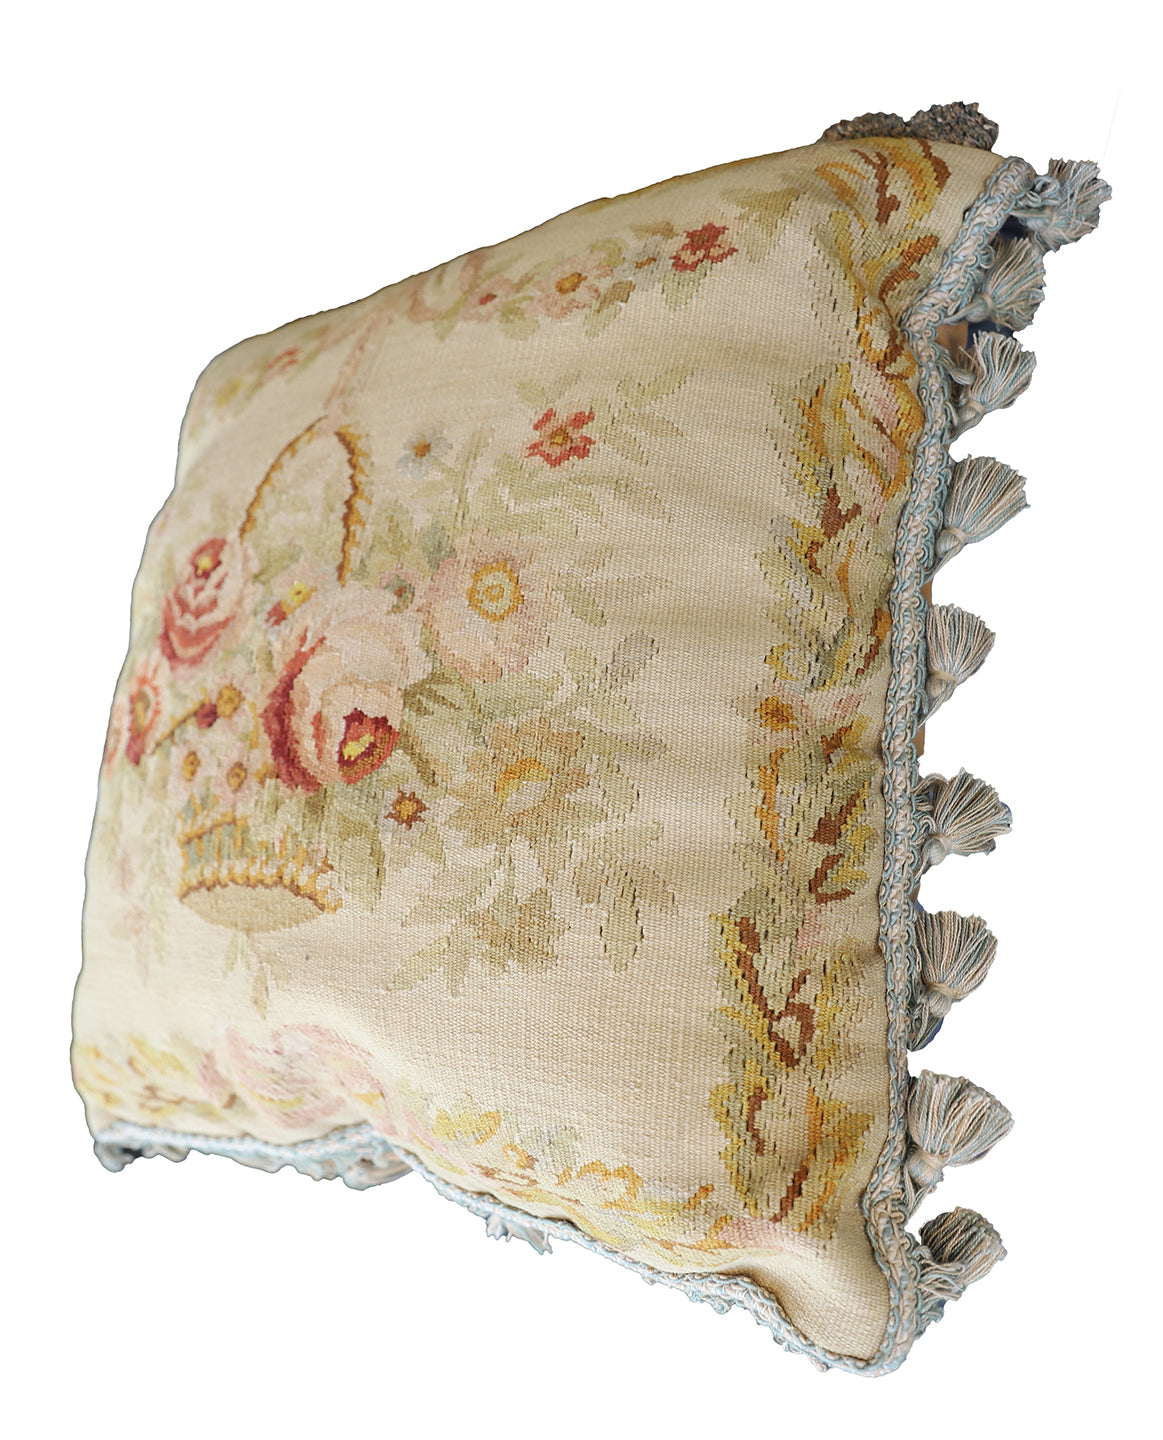 20"x20" Hand-woven Wool Aubusson Weave Pillow with a Flower Basket Design